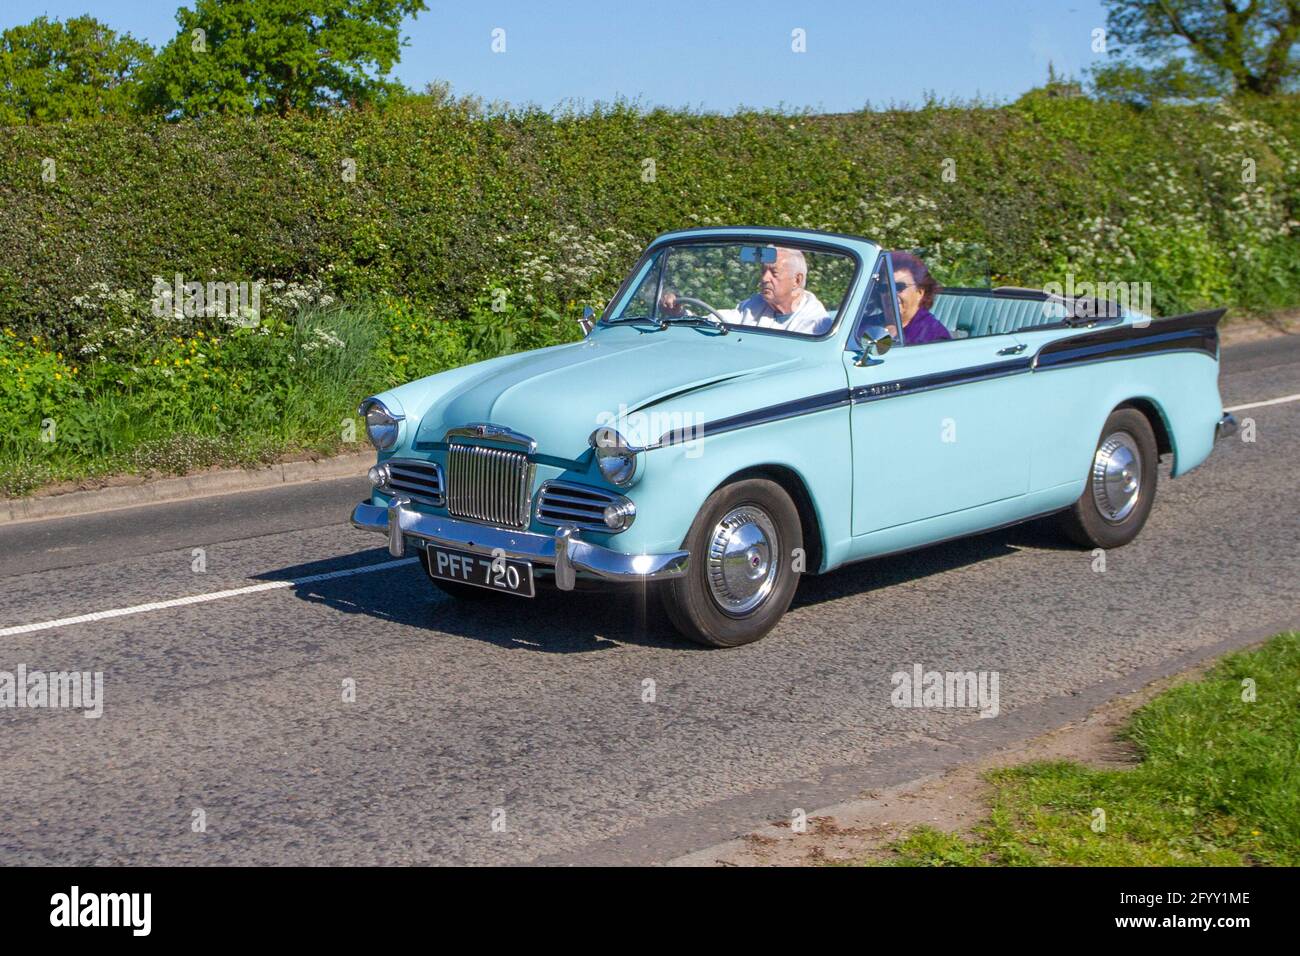 1958 50s fifties blue two-tone Sunbeam Rapier 1494cc four-seater, two-door cabriolet; Vehicular traffic, moving vehicles, cars, vehicle driving  en-route to Capesthorne Hall classic May car show, Cheshire, UK Stock Photo